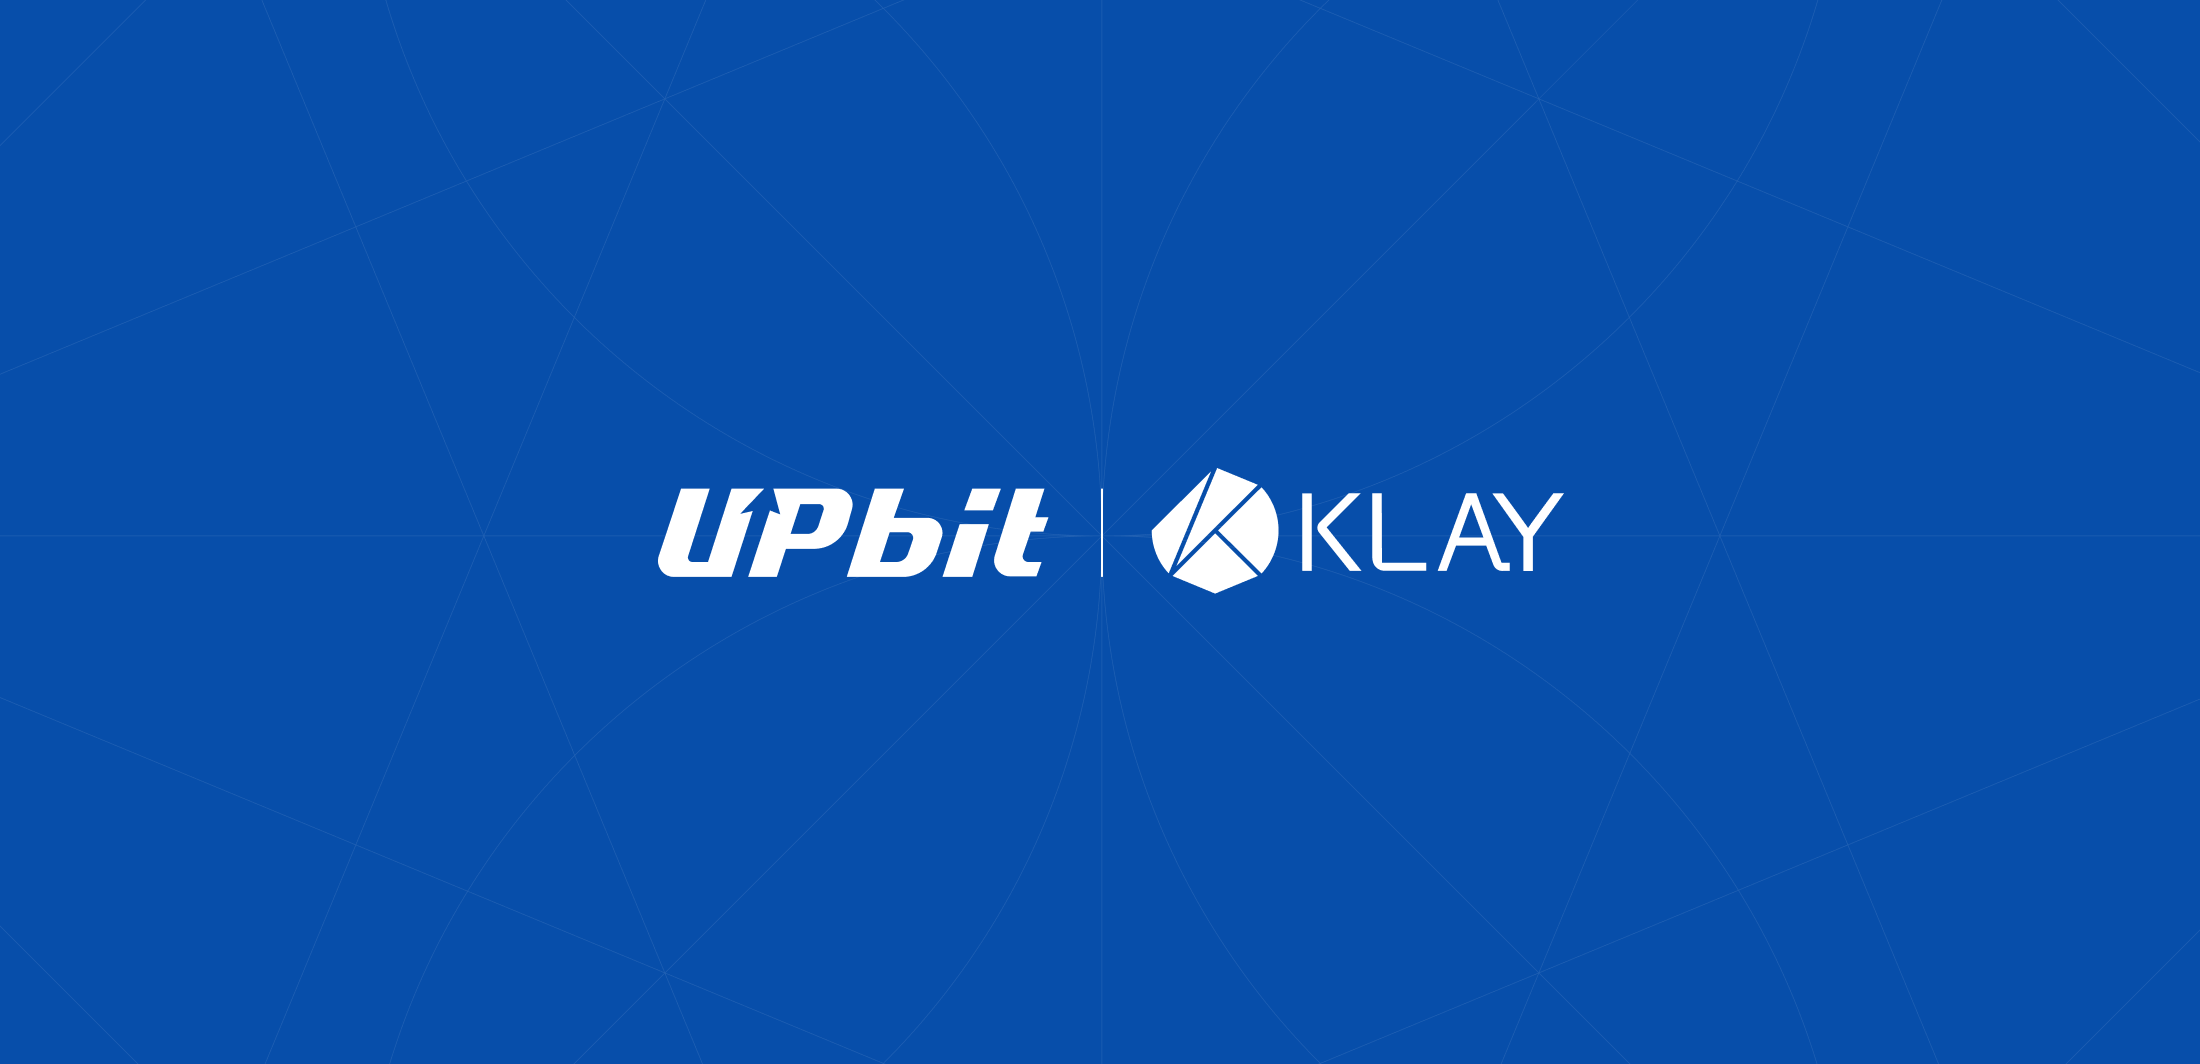 Klaytn Debuts Its Initial Listing on Upbit | by Klaytn ...